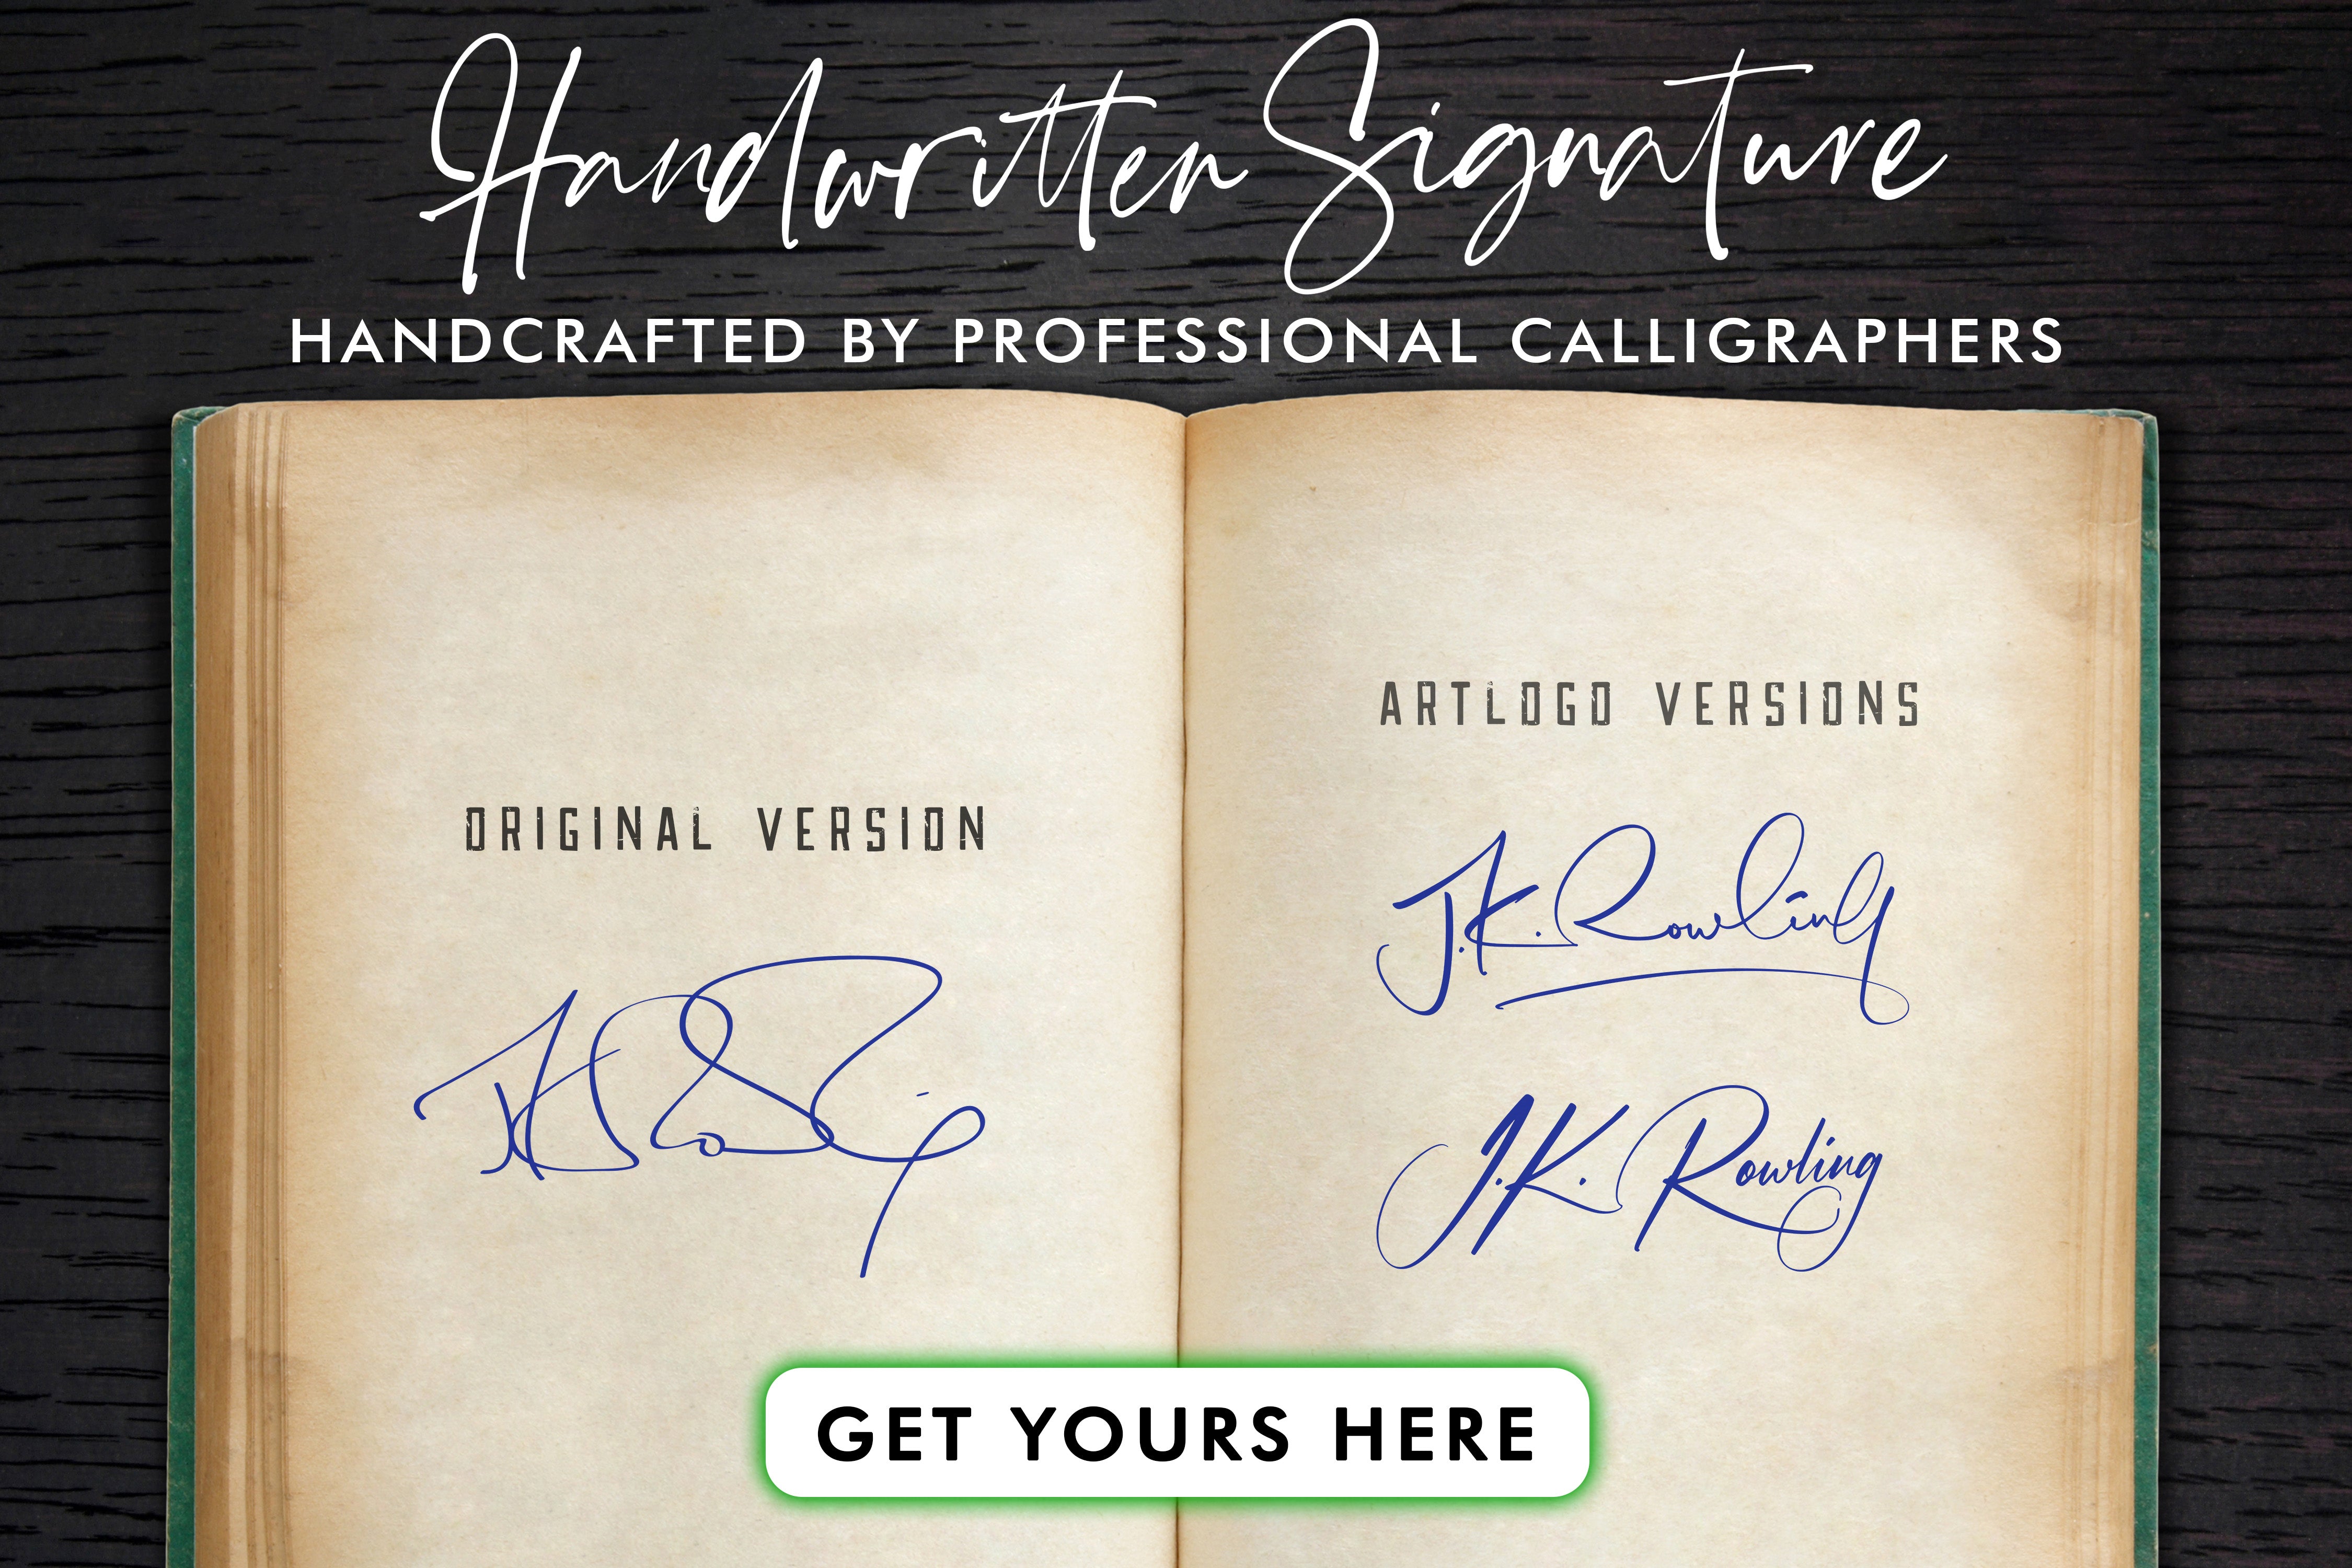 Explore the intriguing world of J.K. Rowling's signature and its estimated value. Discover how much this iconic author's autograph could be worth.